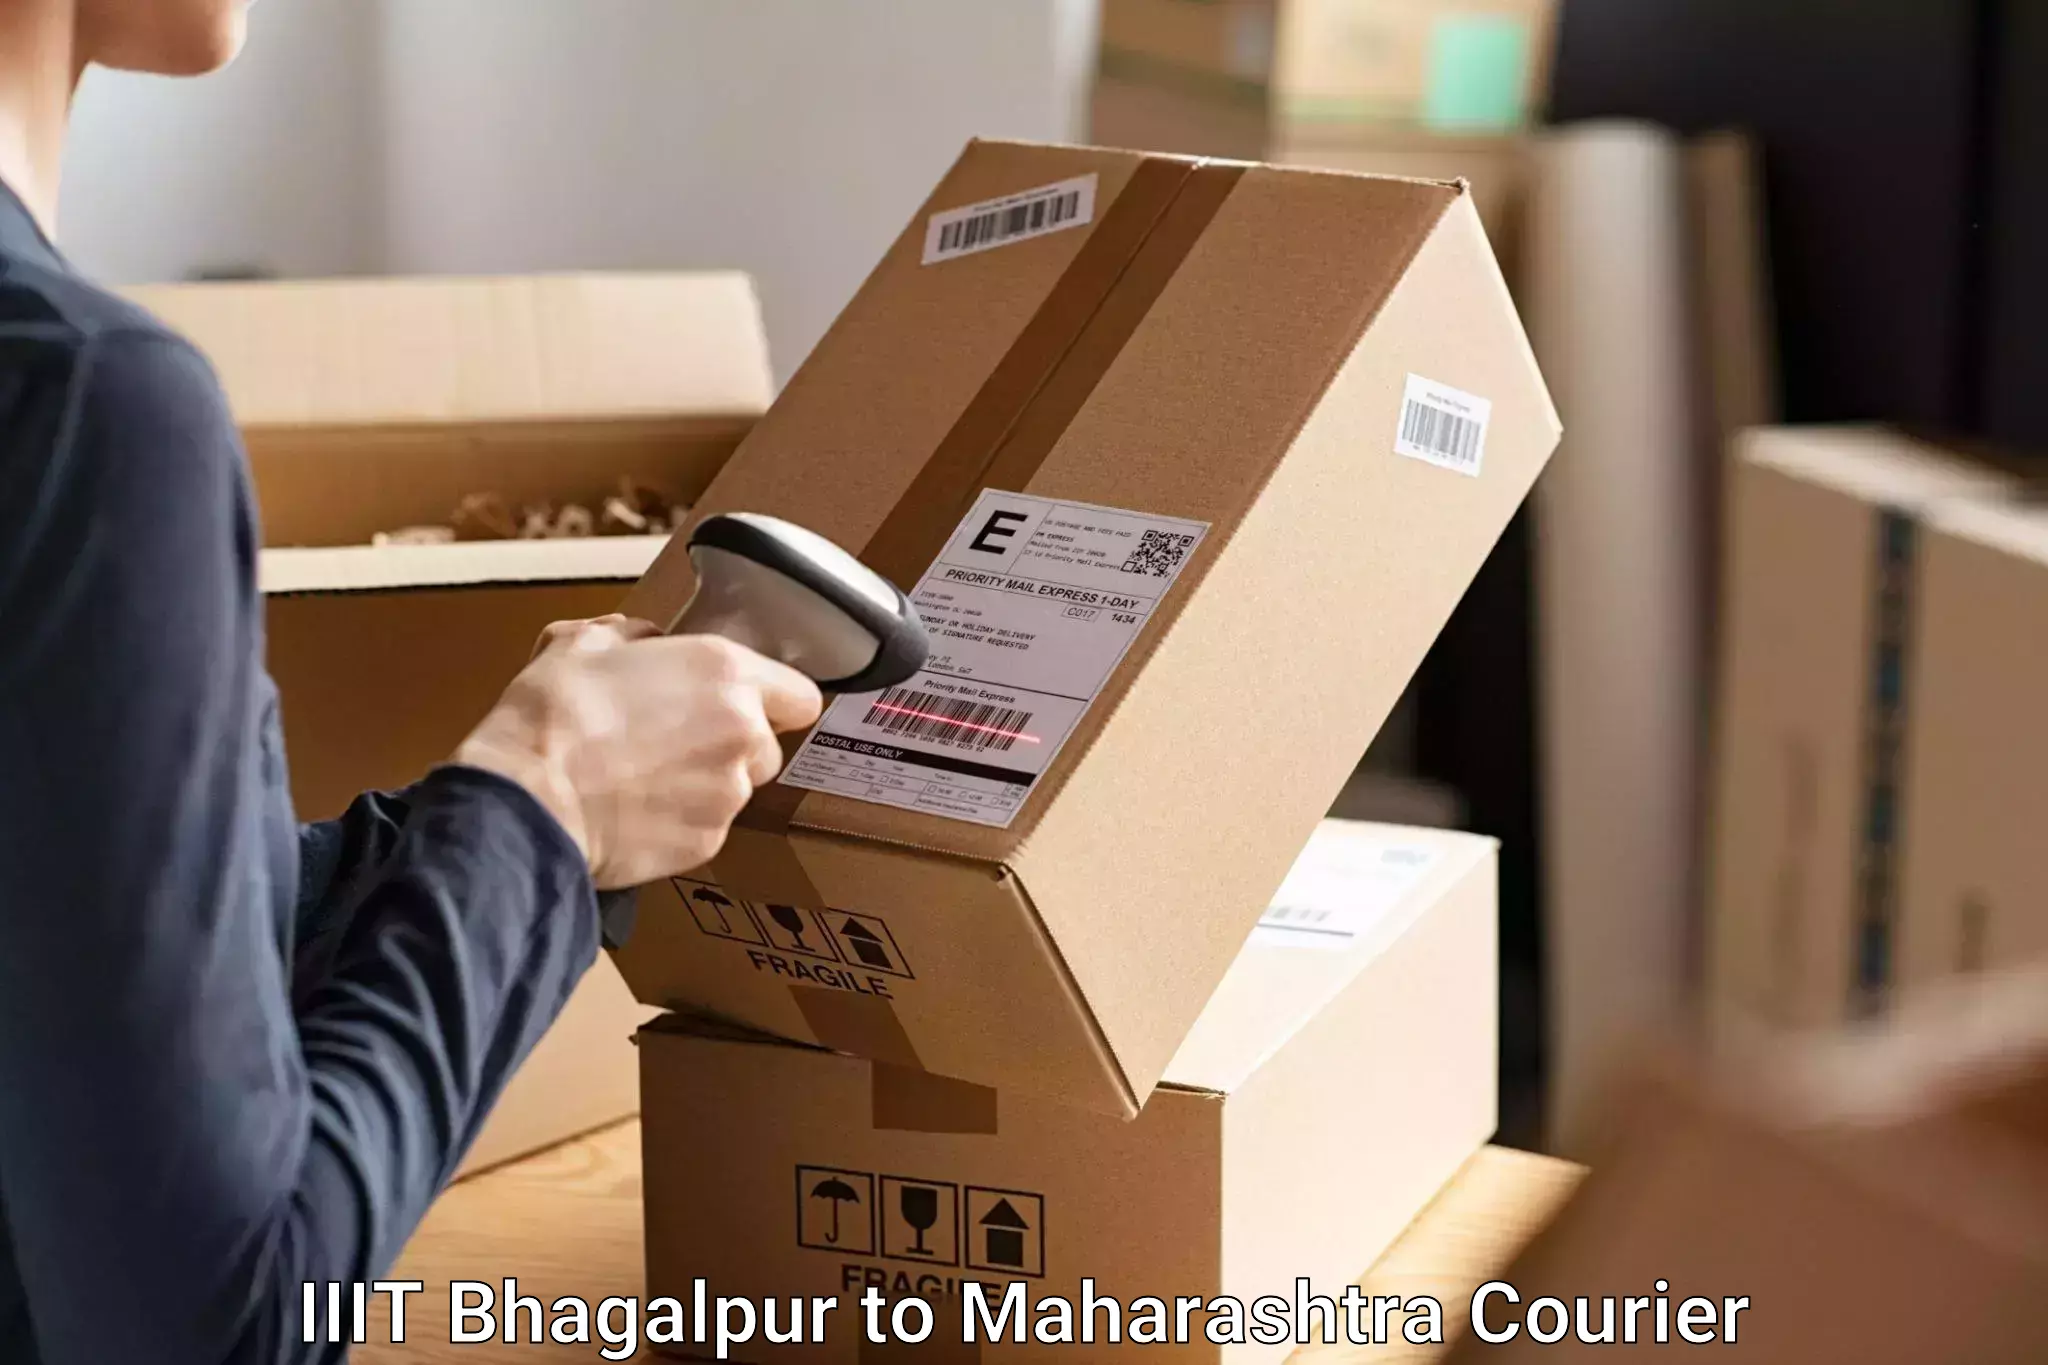 Fast track baggage delivery IIIT Bhagalpur to Nagpur